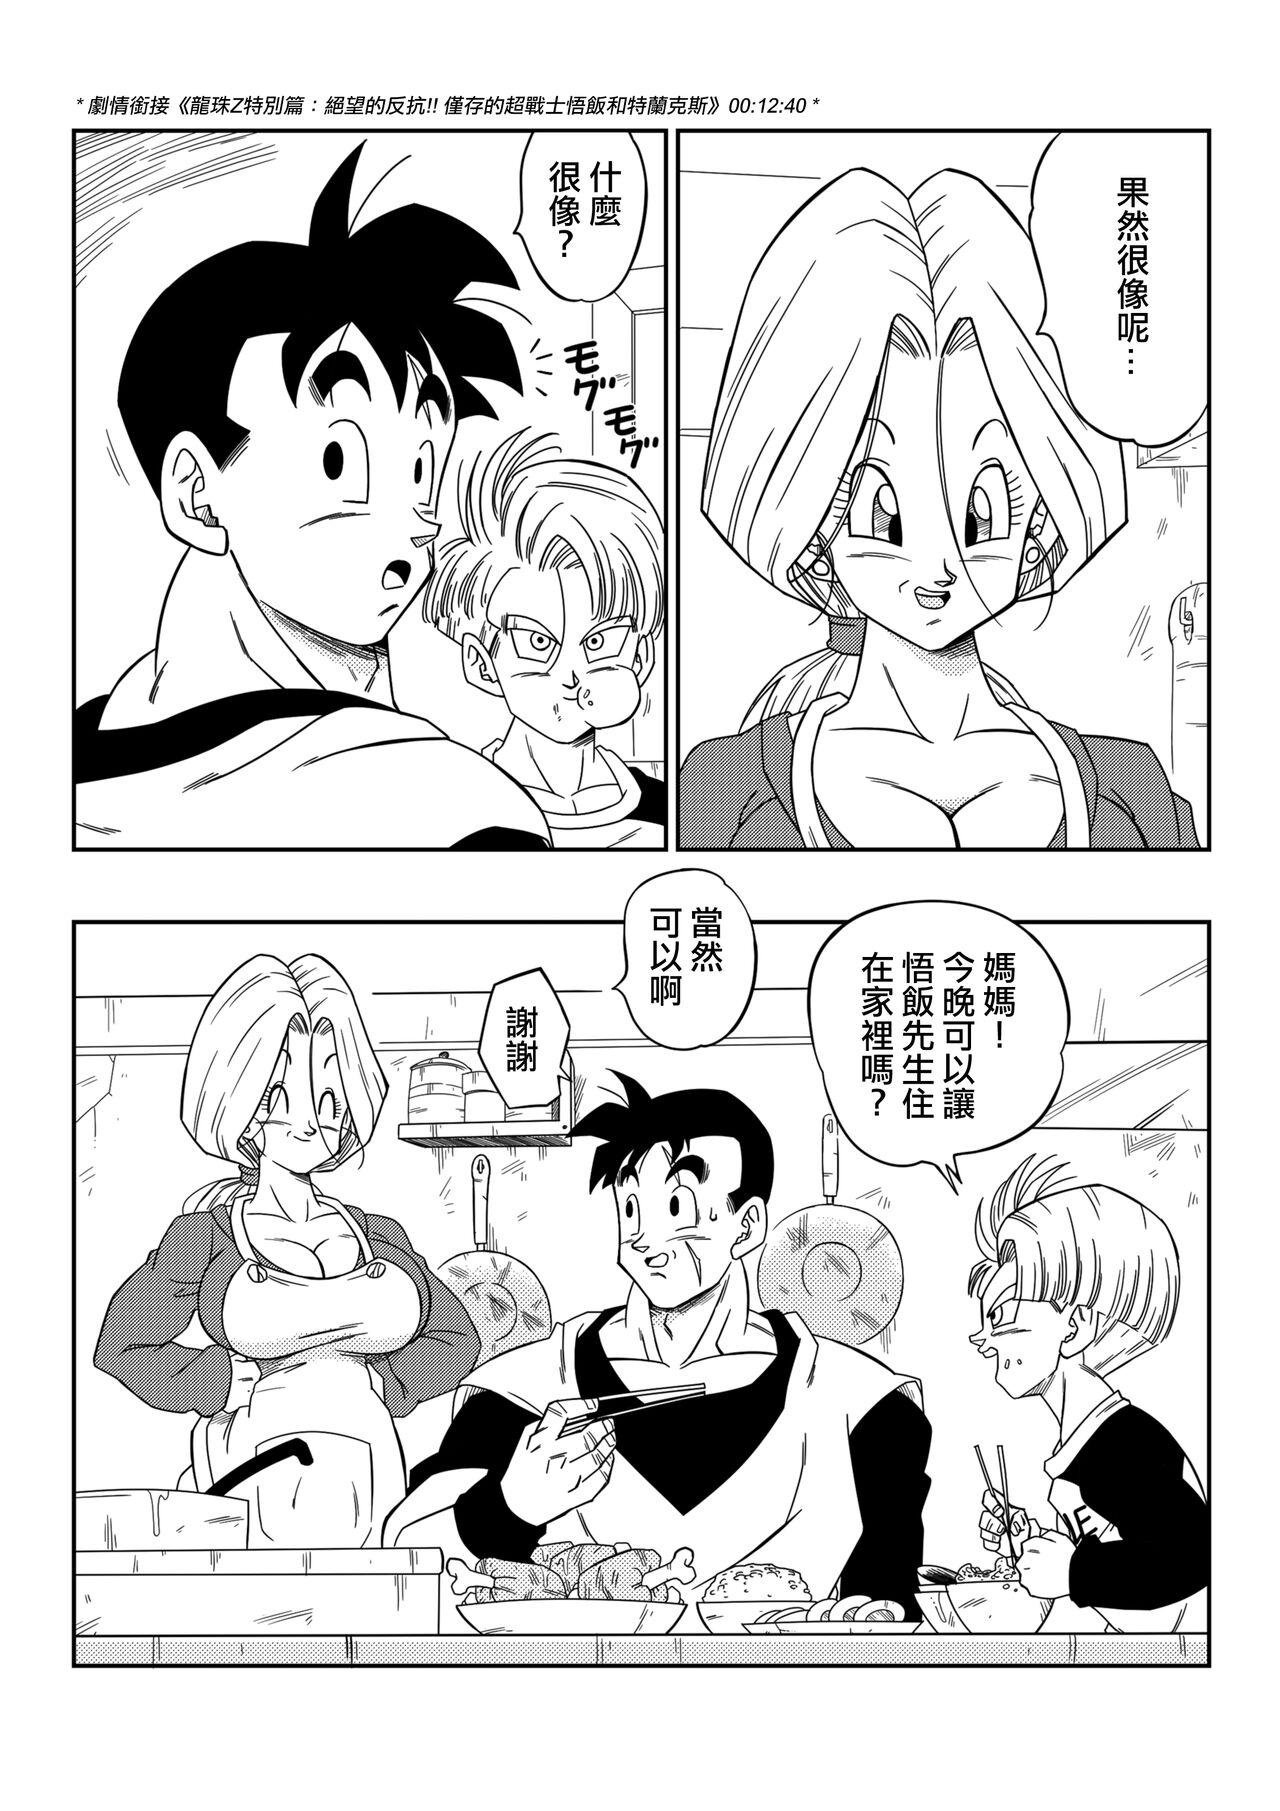 Lost of sex in this Future! - BULMA and GOHAN 2